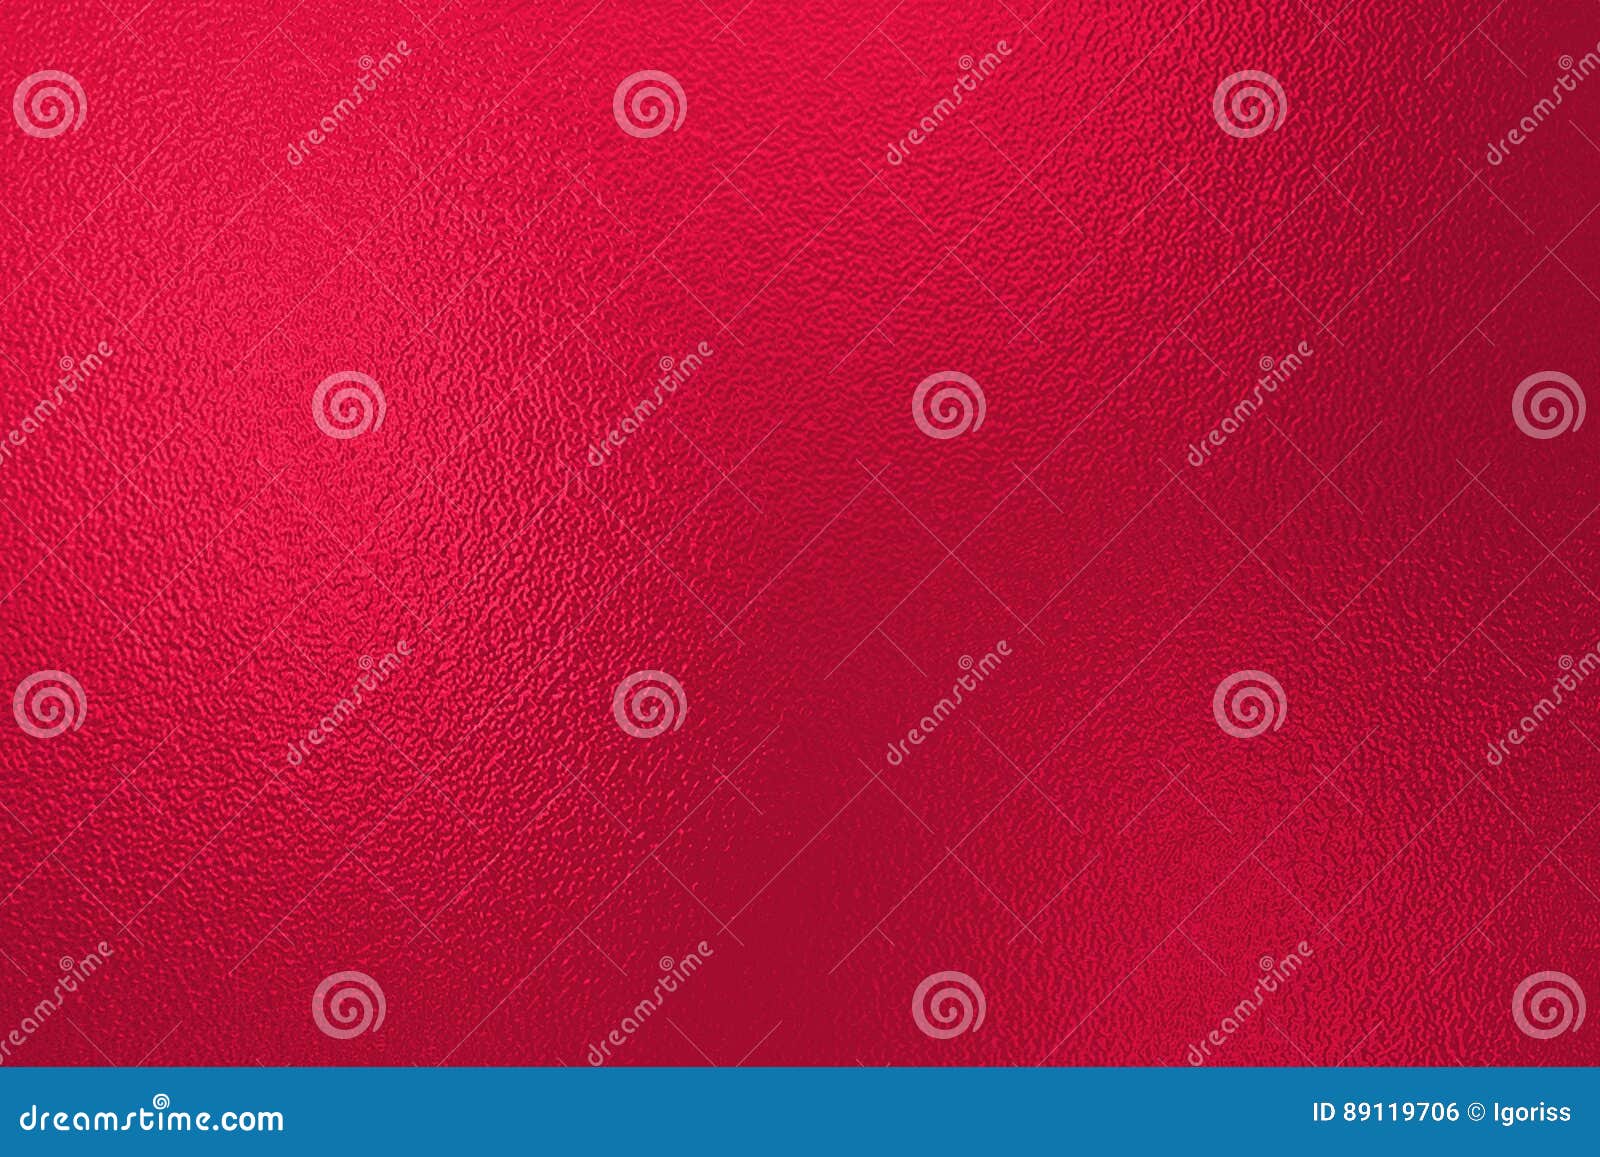 https://thumbs.dreamstime.com/z/red-foil-texture-background-paper-decorative-metallized-paper-89119706.jpg